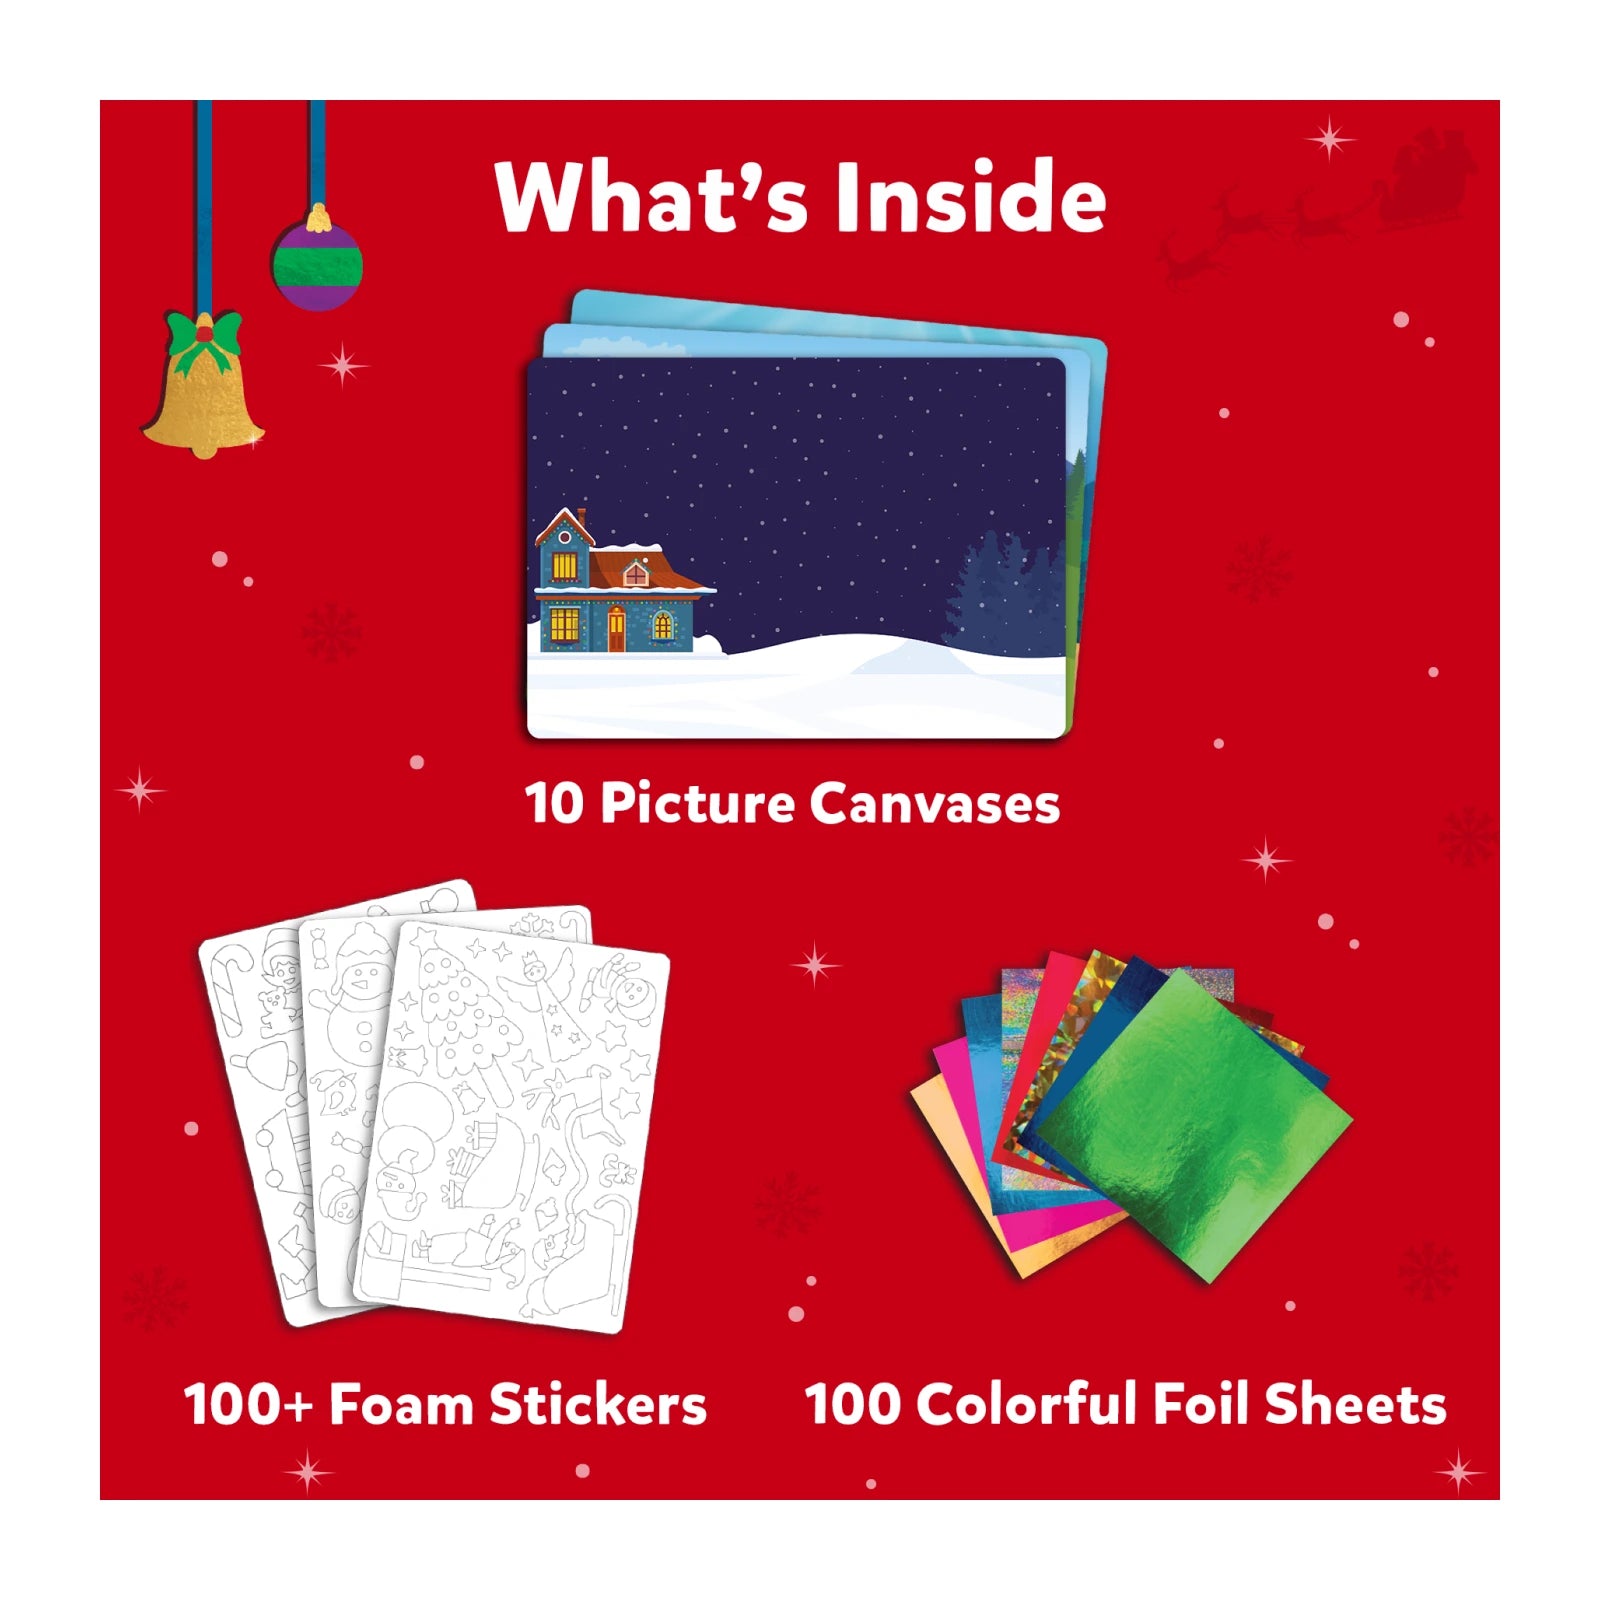 HOLIDAY FOIL FUN SET - The Toy Insider